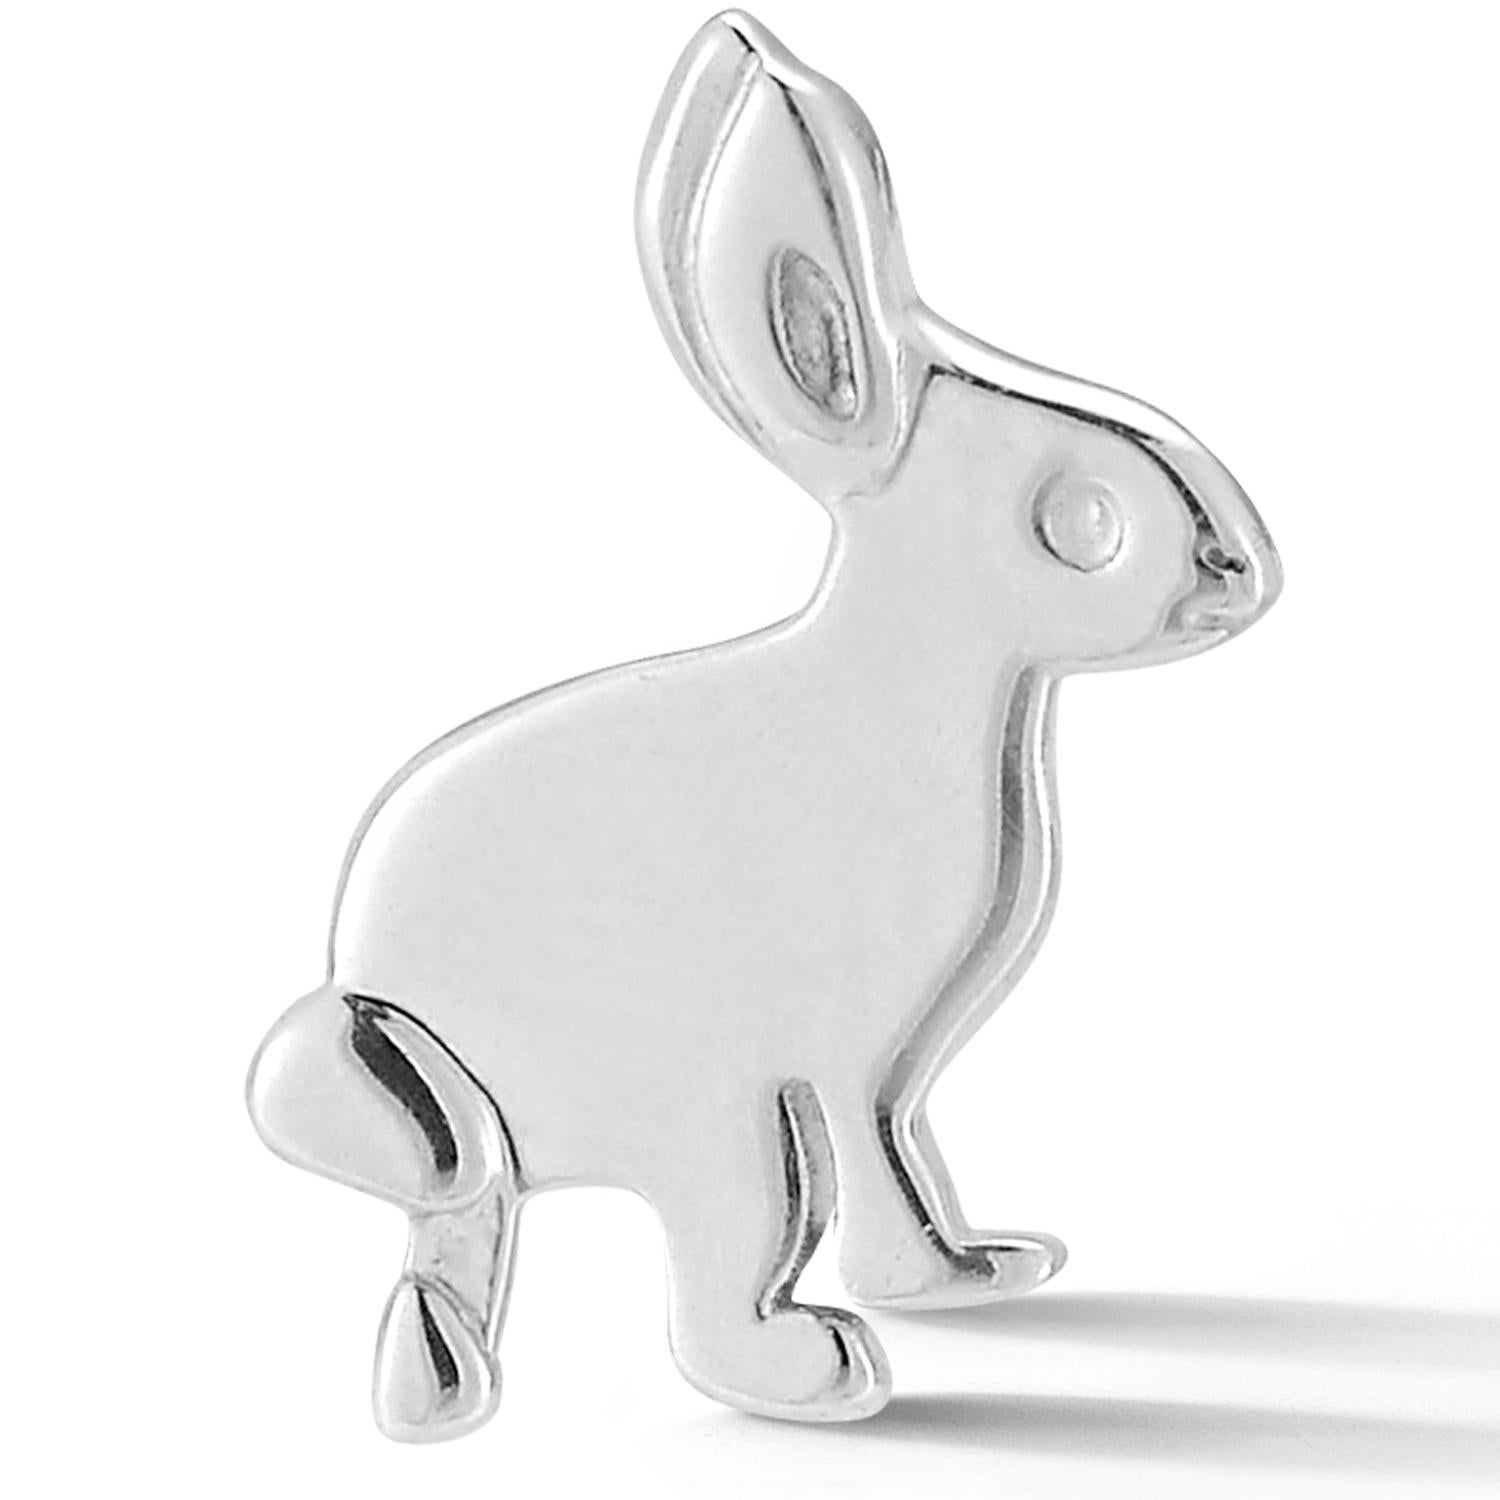 These adorable bunny stud earrings wears well on your ear lobes all day long. 

A great everyday earring with a bit of whimsy and cuteness, it's also the year of the Rabbit this year!

Dimensions: 10mm Height x 8mm Width x 1.2mm thickness

Sterling